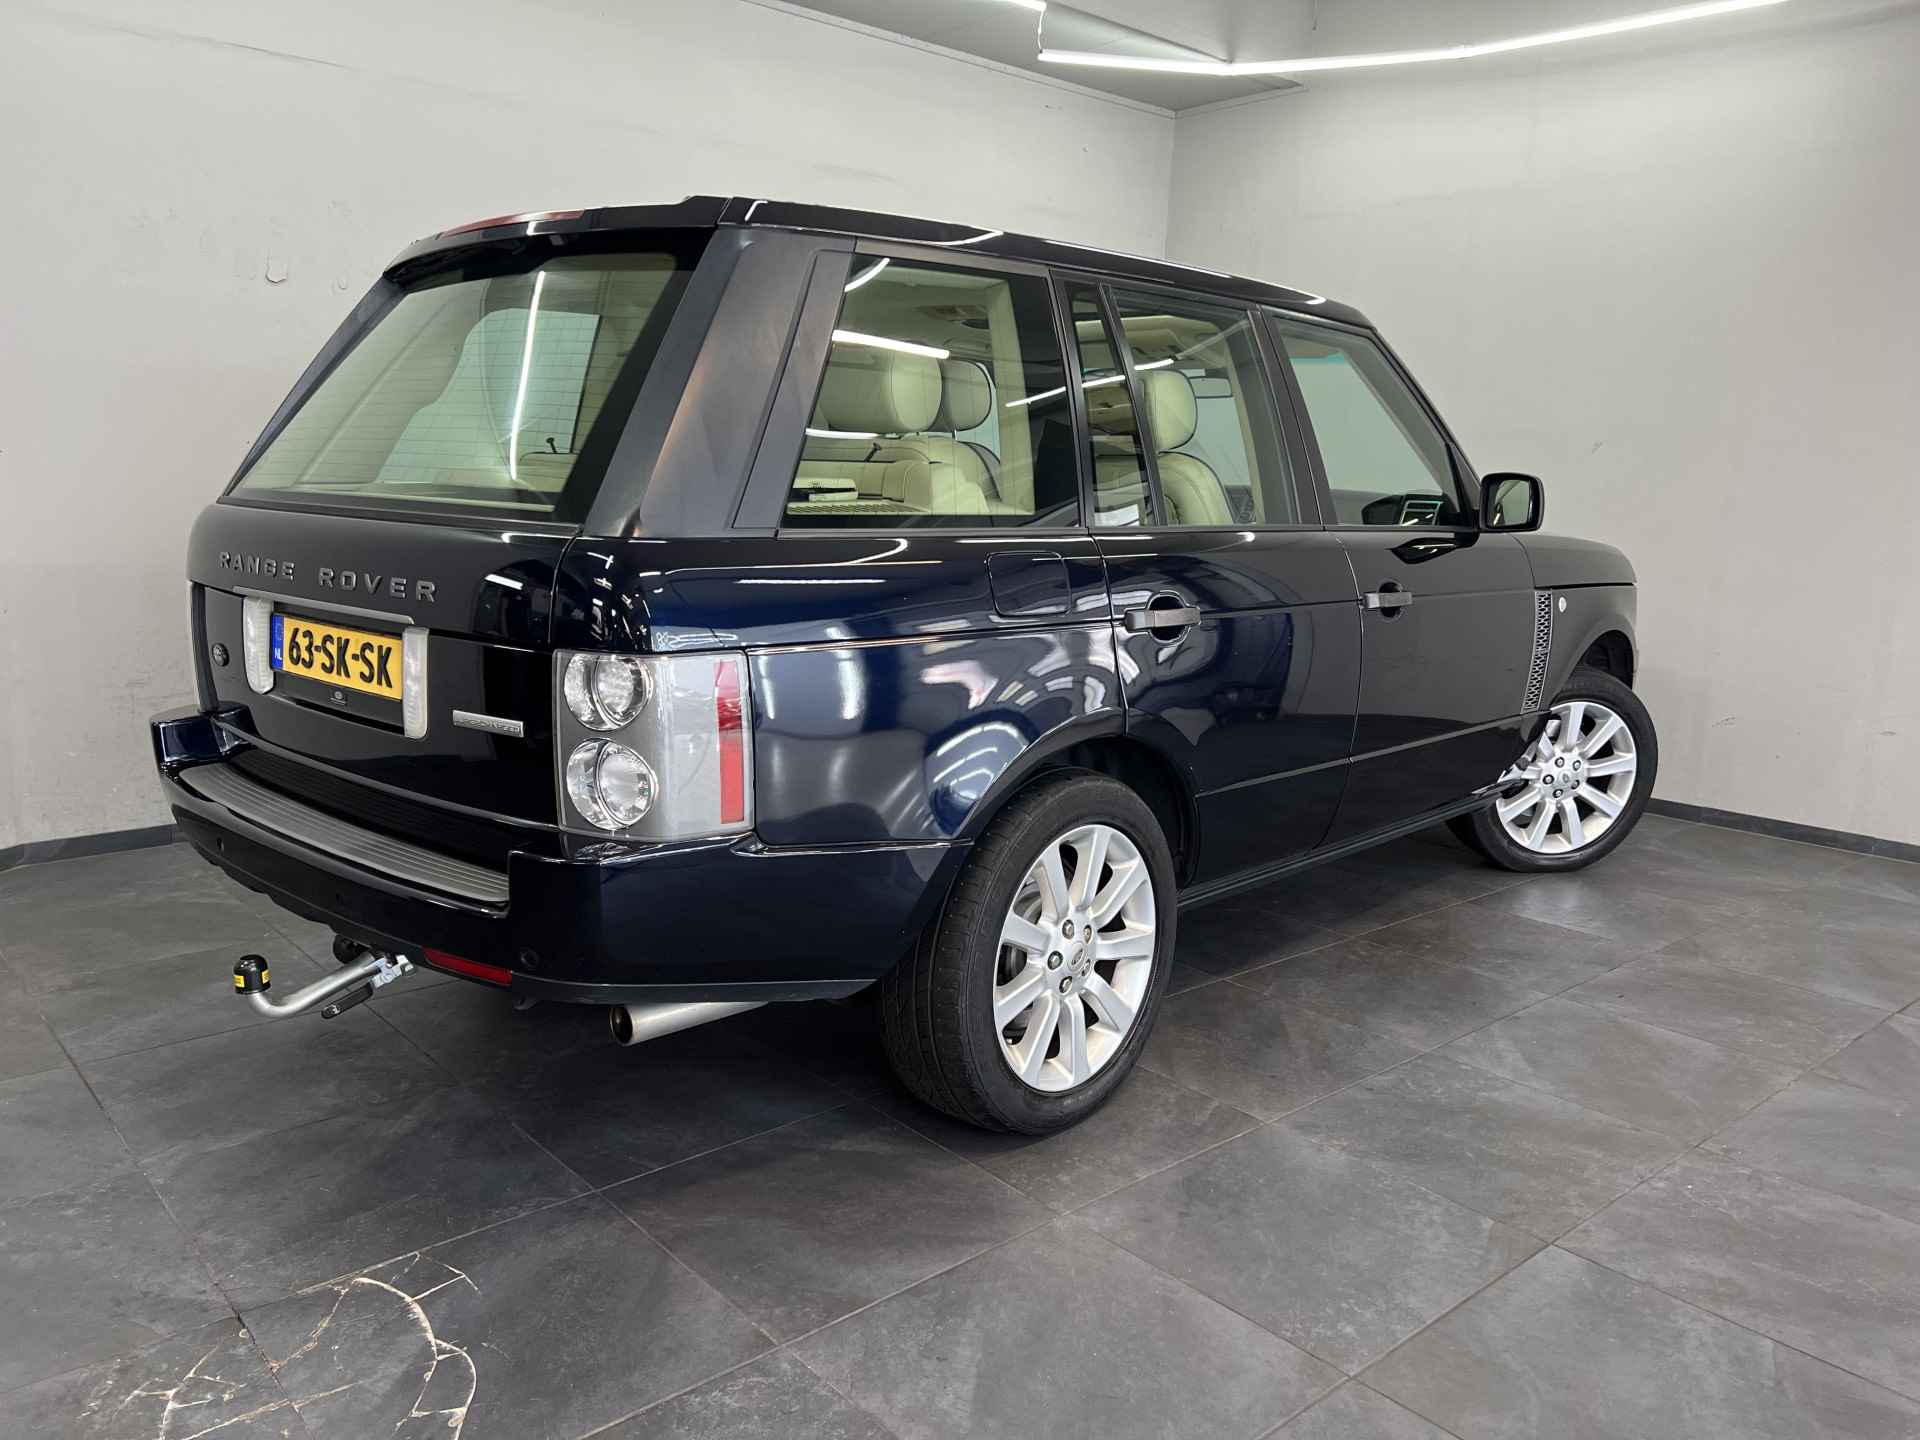 Land Rover Range Rover 4.2 V8 Supercharged ✅UNIEKE STAAT✅Airco✅Cruise controle✅Navigatie✅5 deurs✅TREKHAAK - 20/52